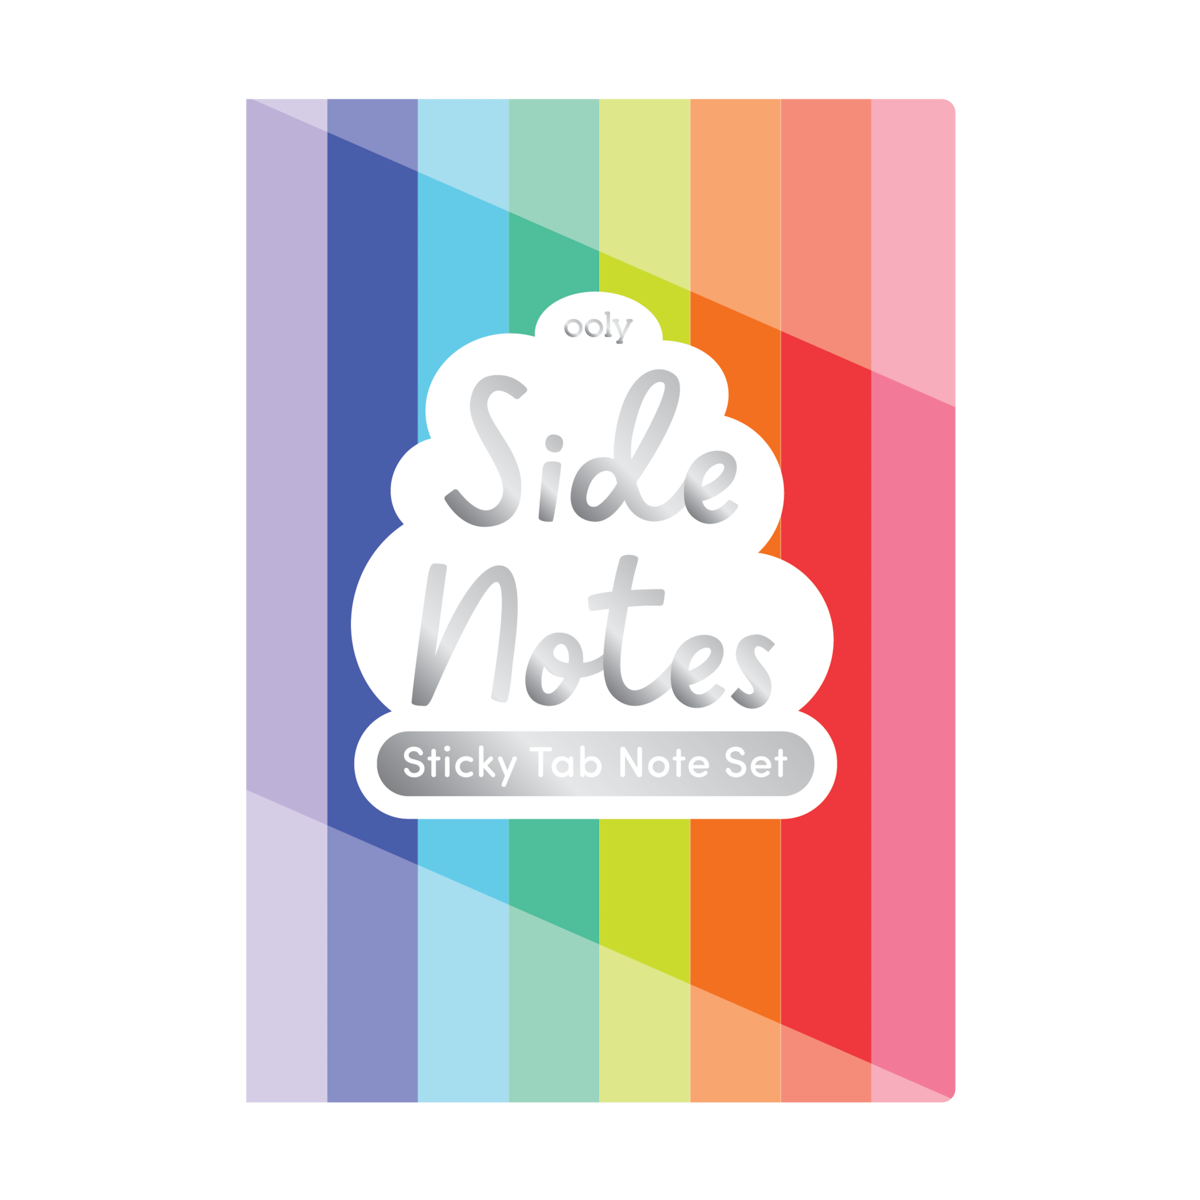 Ooly Note Pals Sticky Tabs - Cat Cafe (1 Pack)